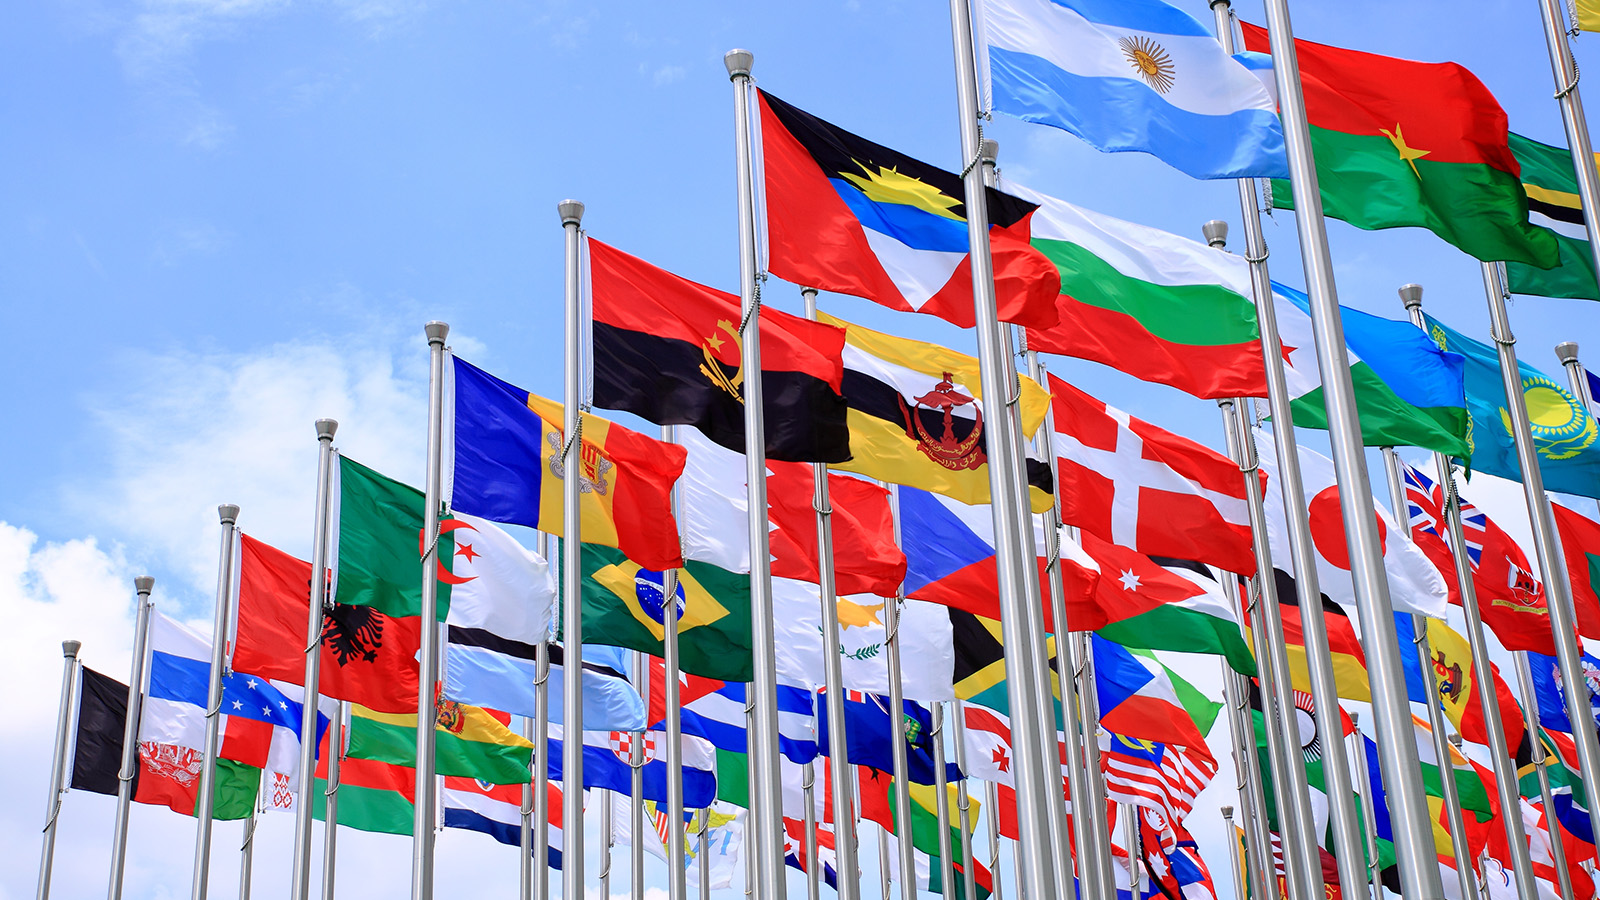 Photo of flags from around the world